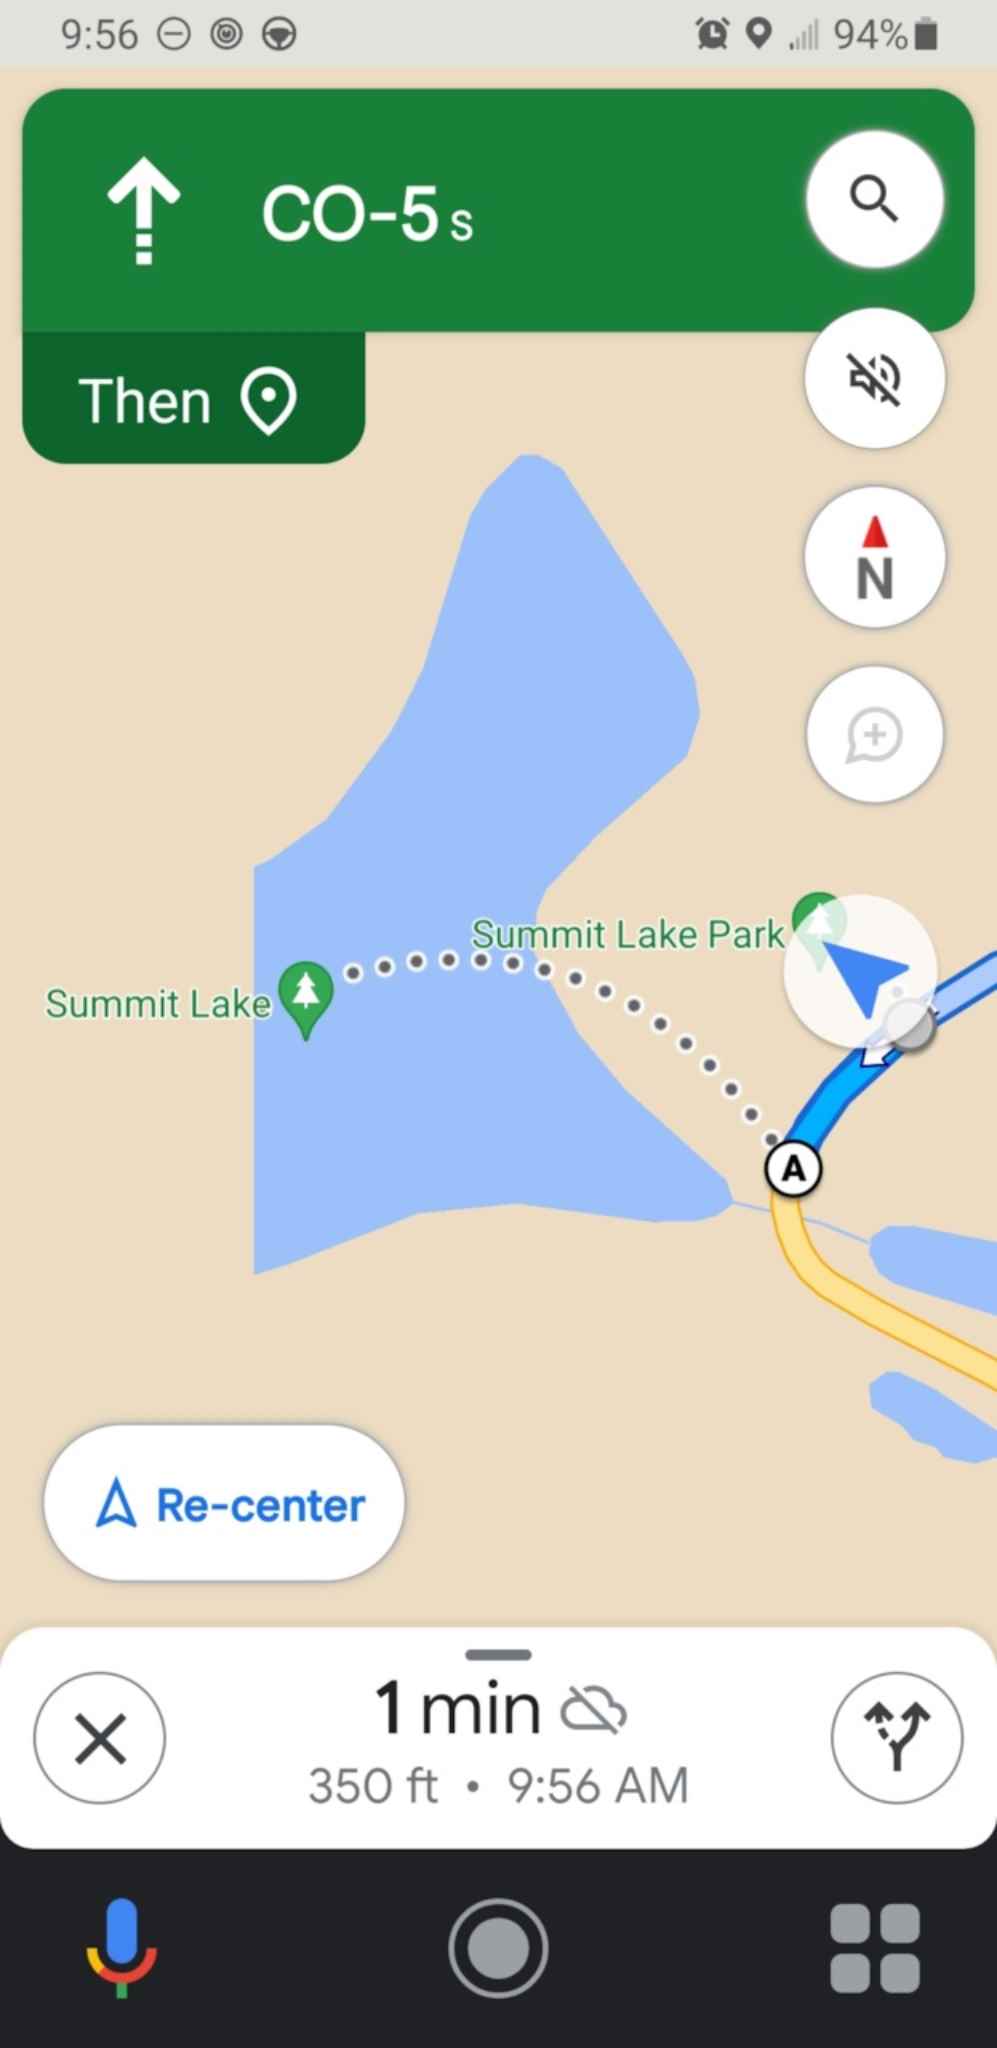 end of the road is Summit Lake - Mt Evans is above it (no pics :(